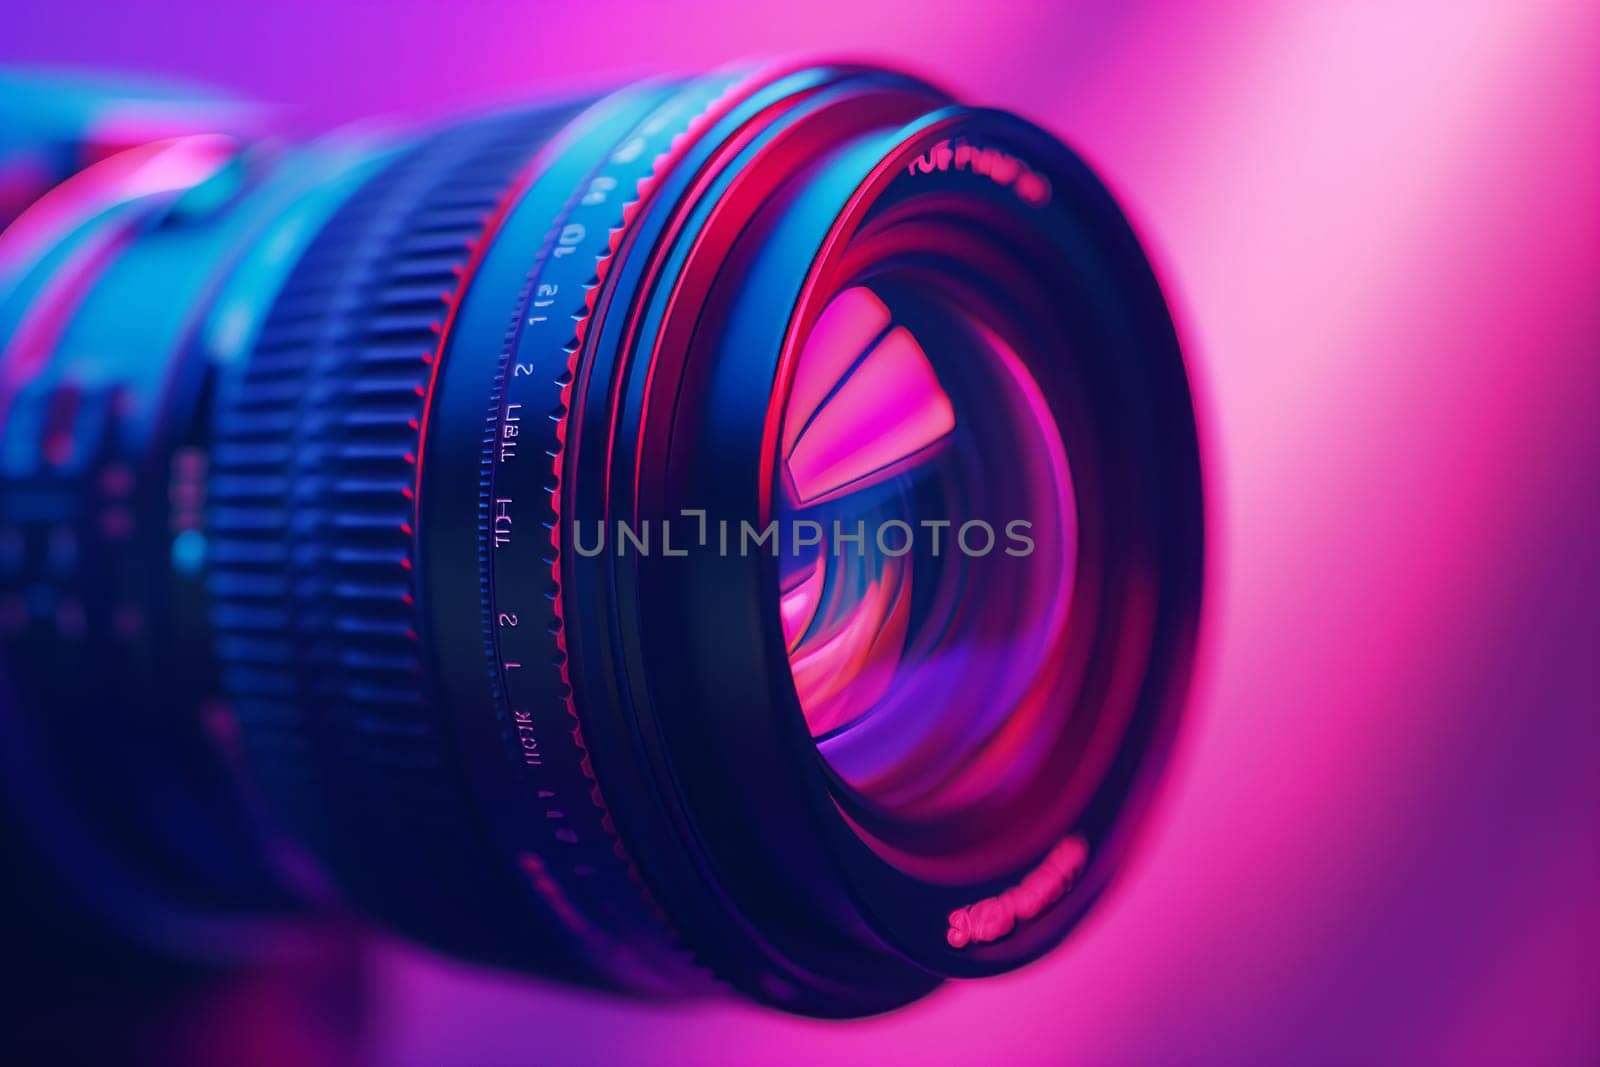 A close up shot of a camera lens against a vibrant purple background, showcasing the colorfulness and beauty of the lens. The image evokes a sense of flash photography and camera accessories